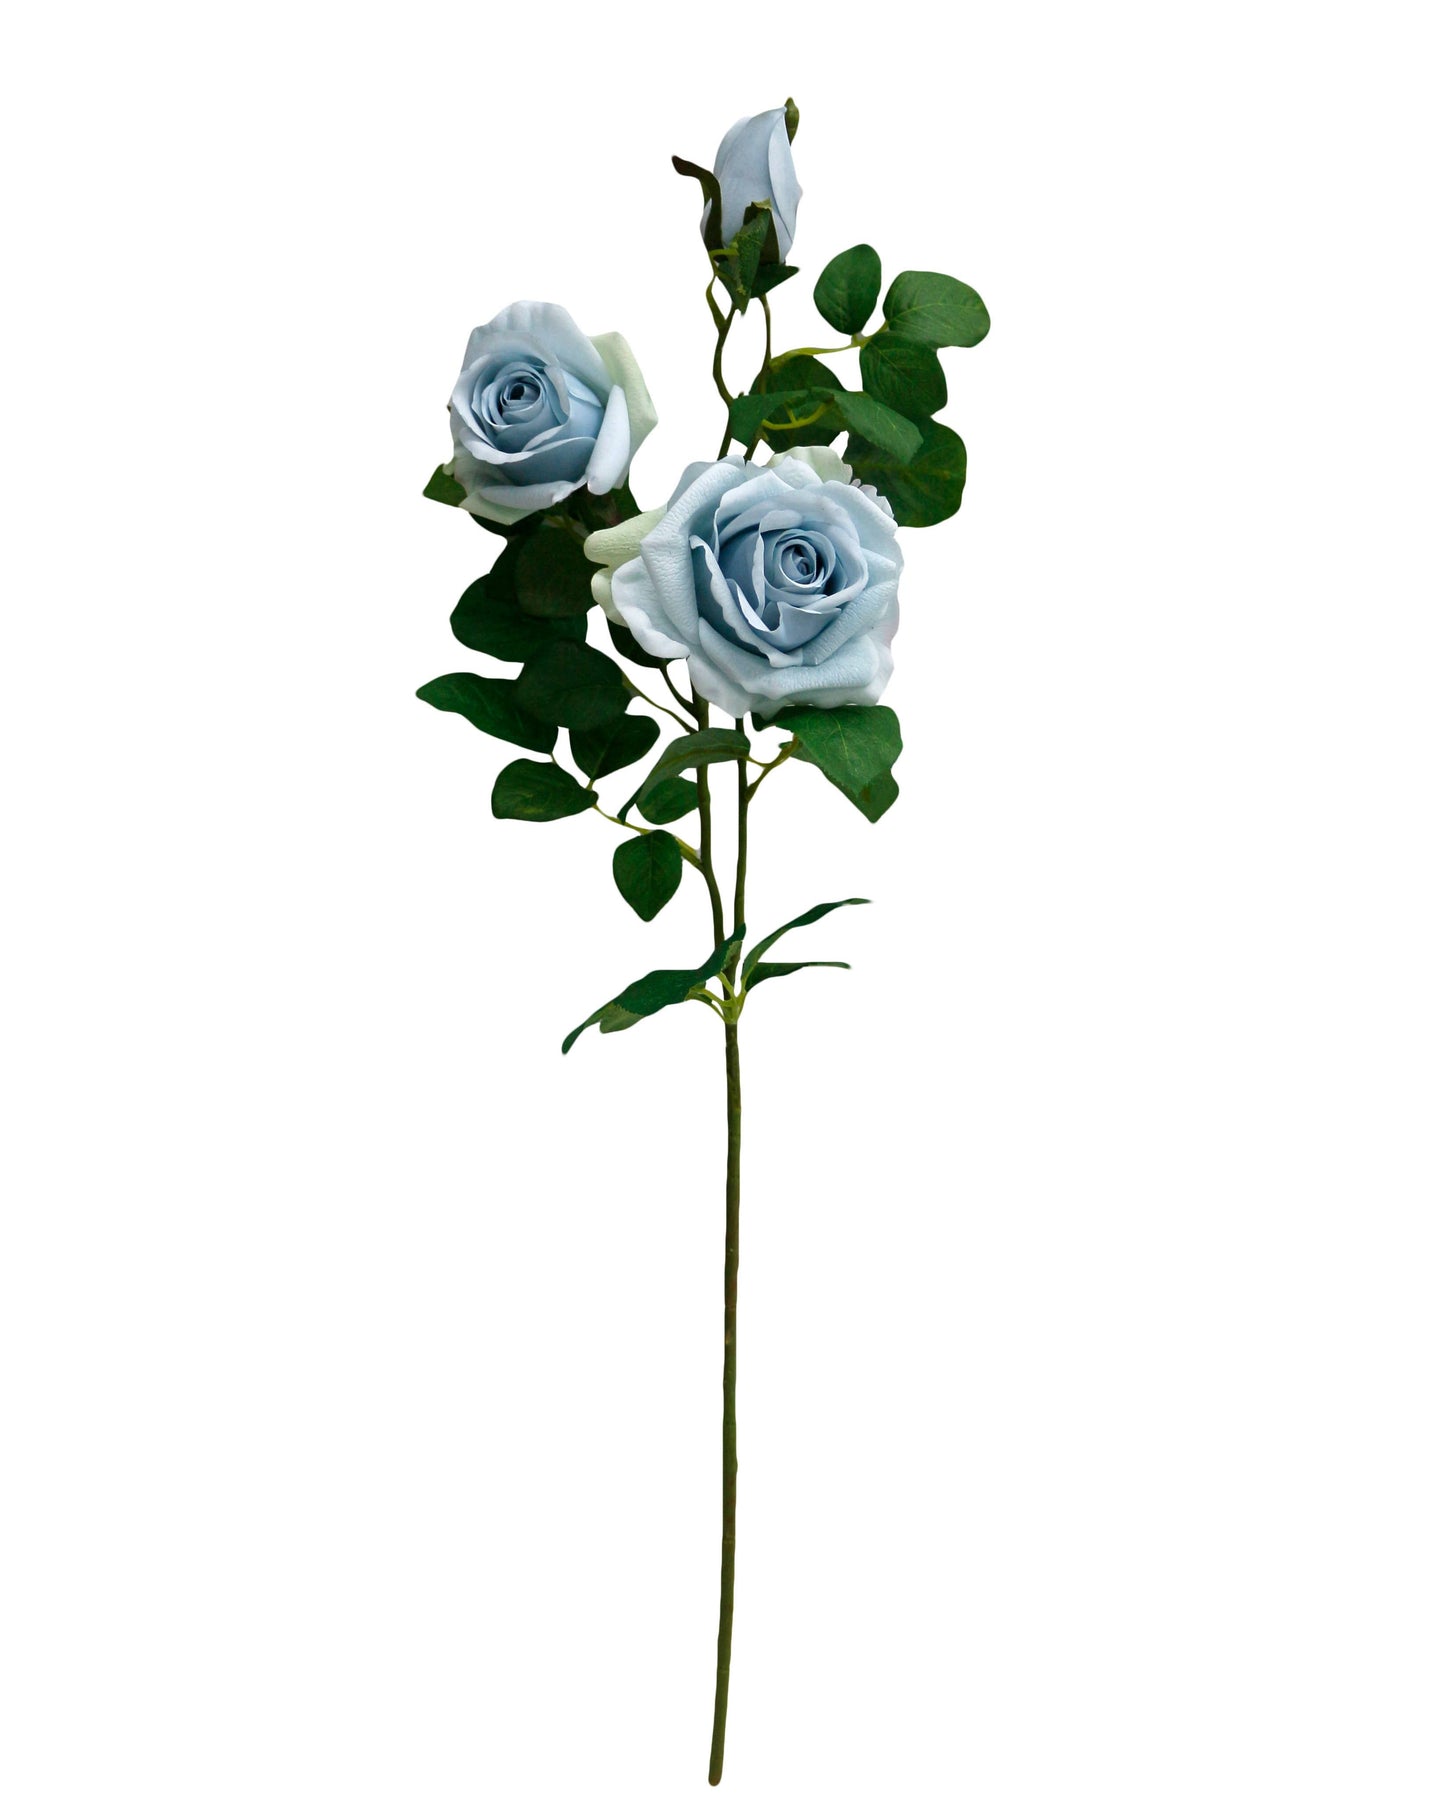 27" real touch Artificial rose-2 flowers 1 bud